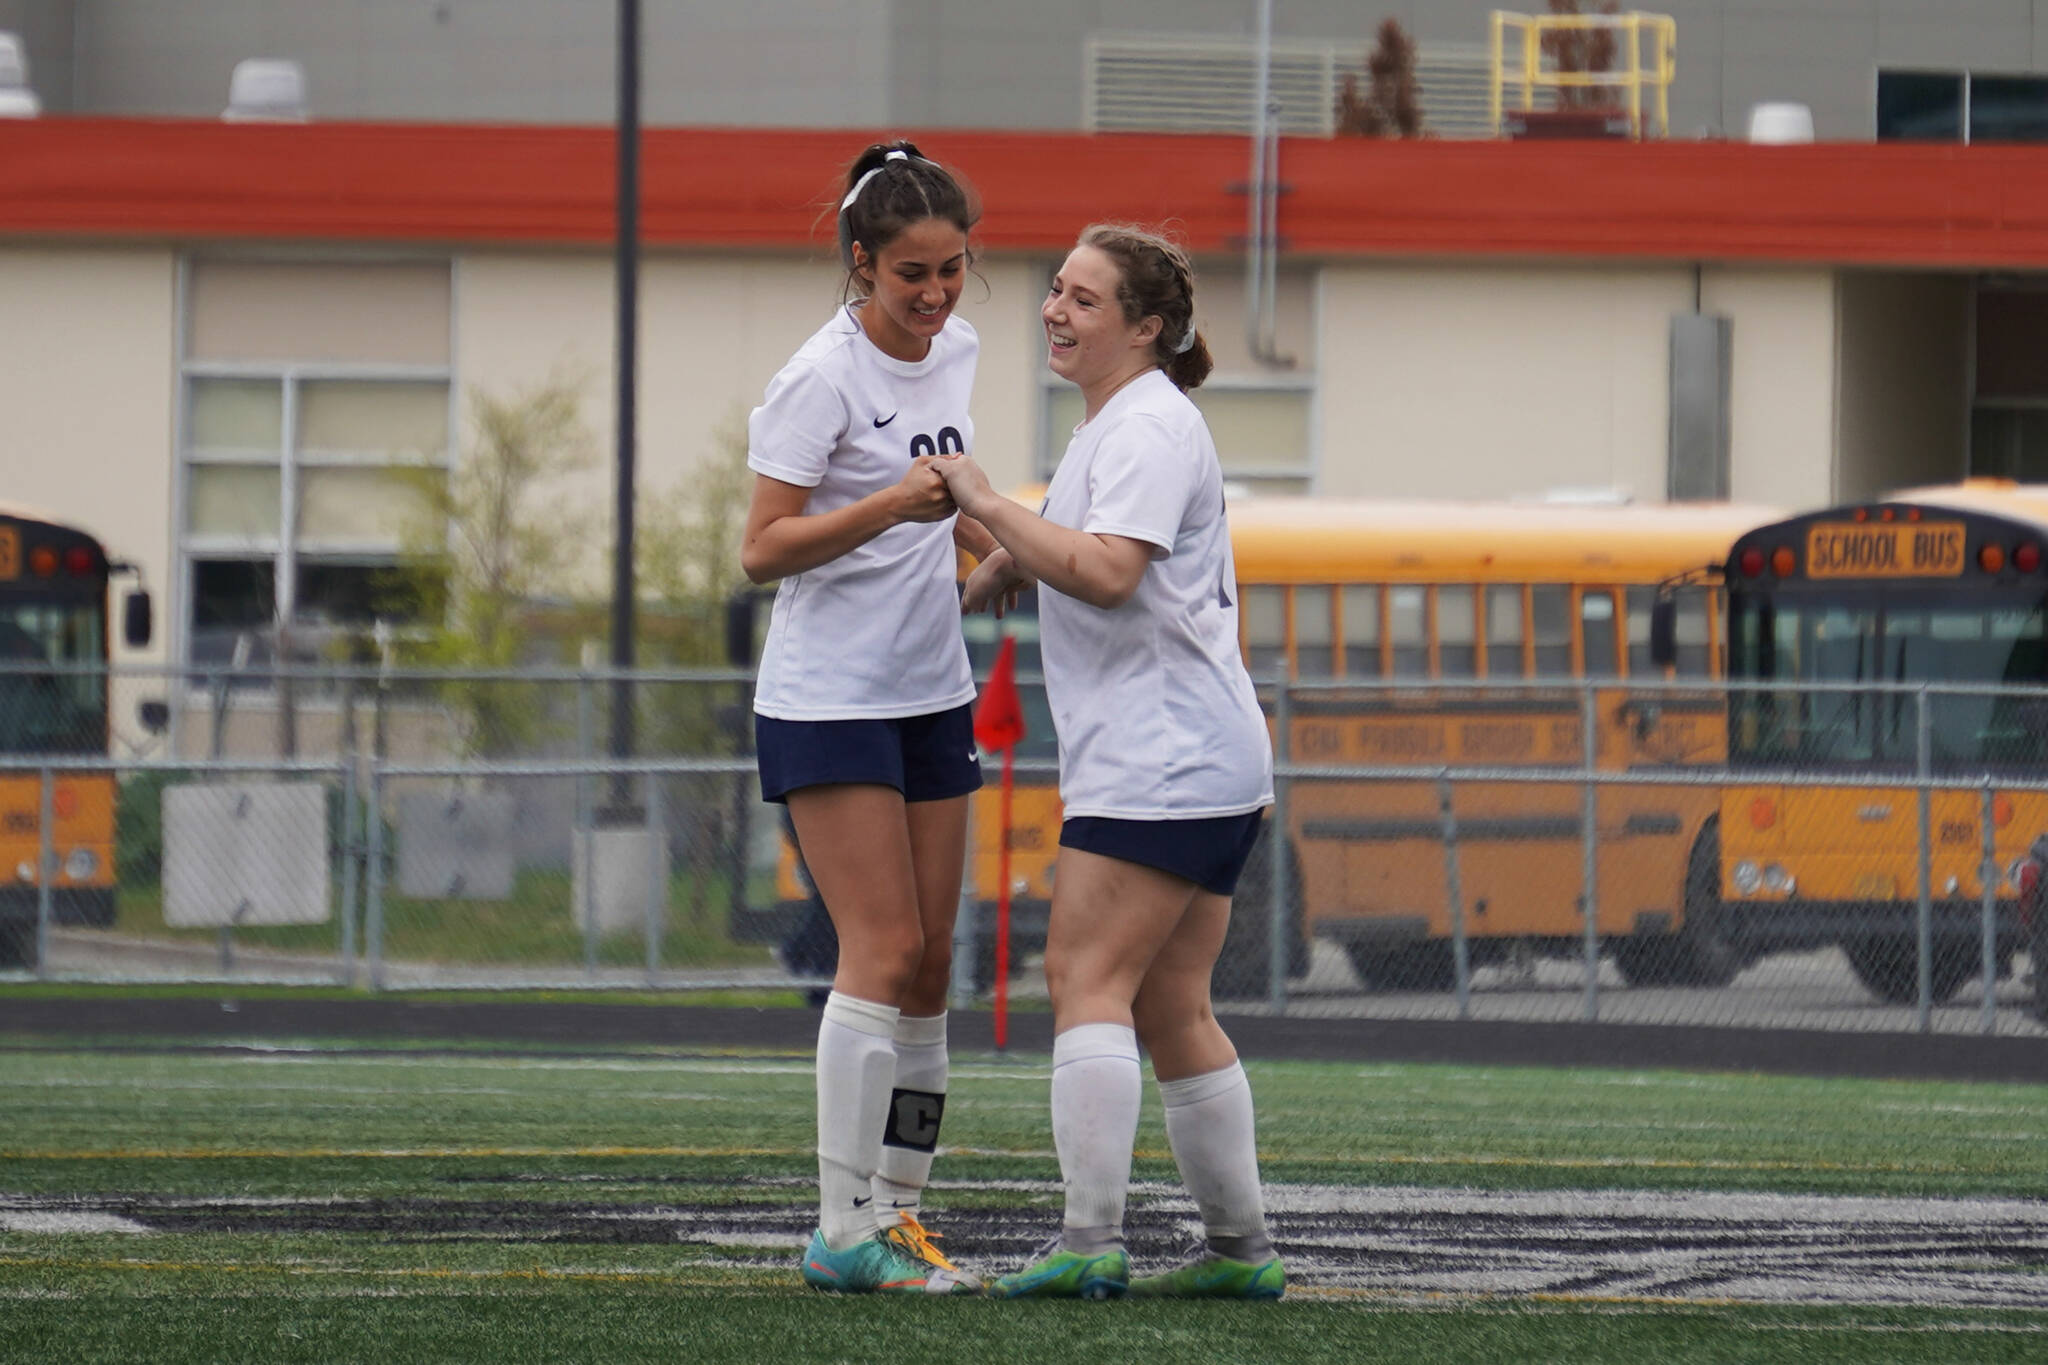 Soldotna’s Zayra Poage and Liberty Miller celebrate after Miller scored a goal during the Division II Soccer State Championship on Saturday, May 27, 2023, at West Anchorage High School in Anchorage, Alaska. (Jake Dye/Peninsula Clarion)